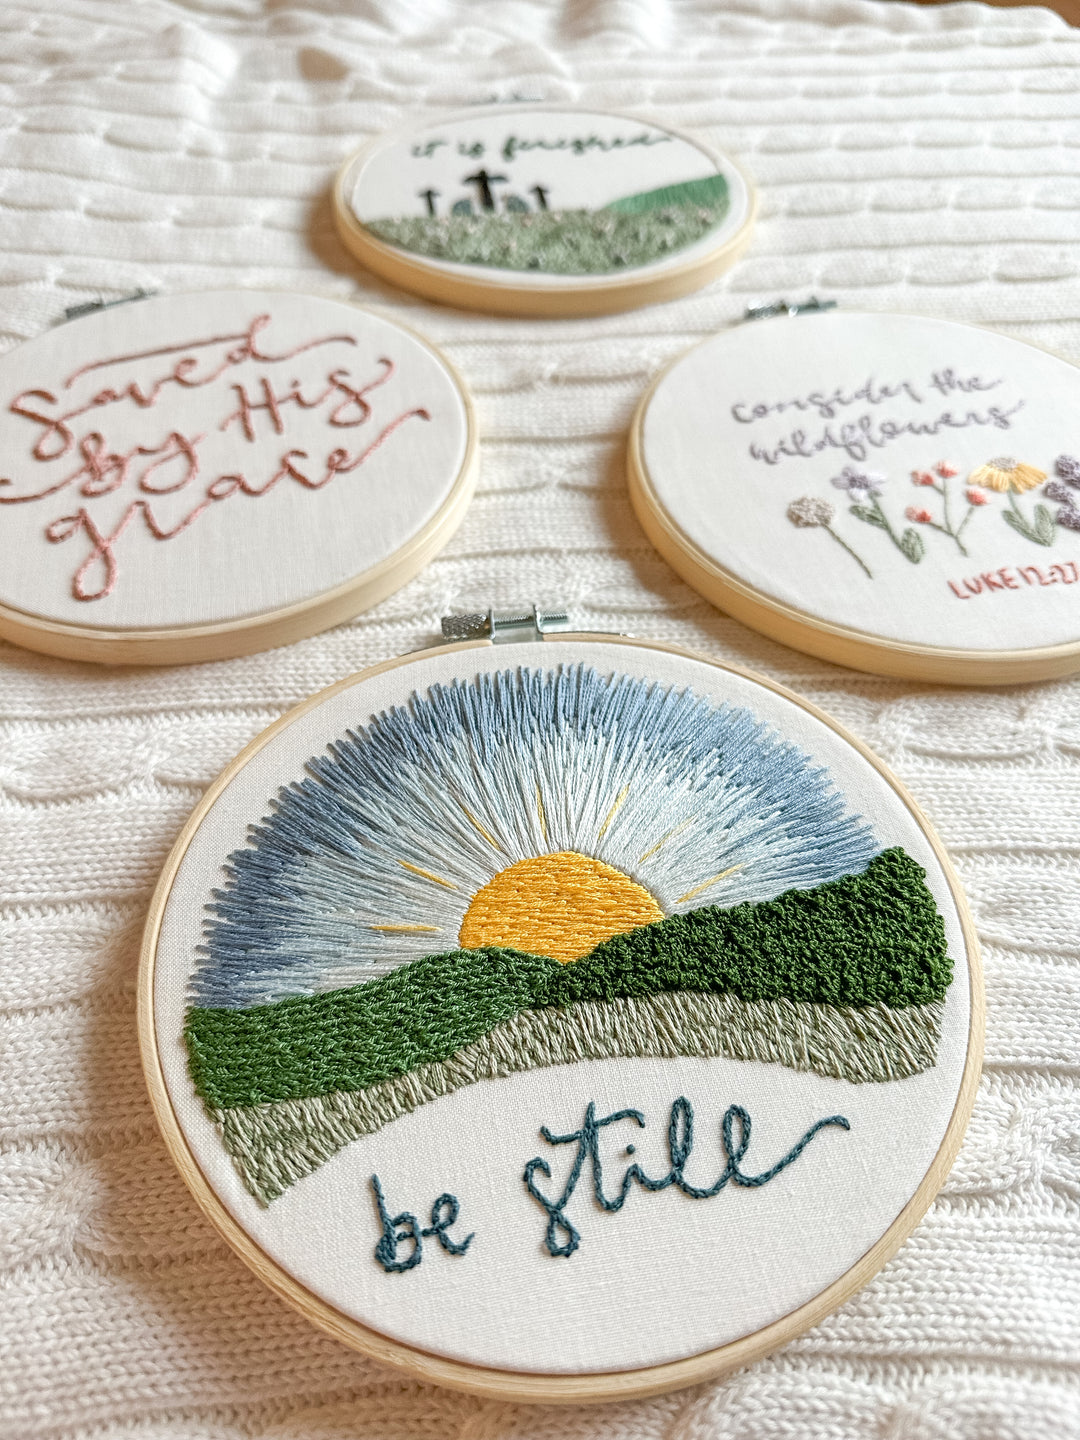 Cast All Your Cares Embroidery Kit